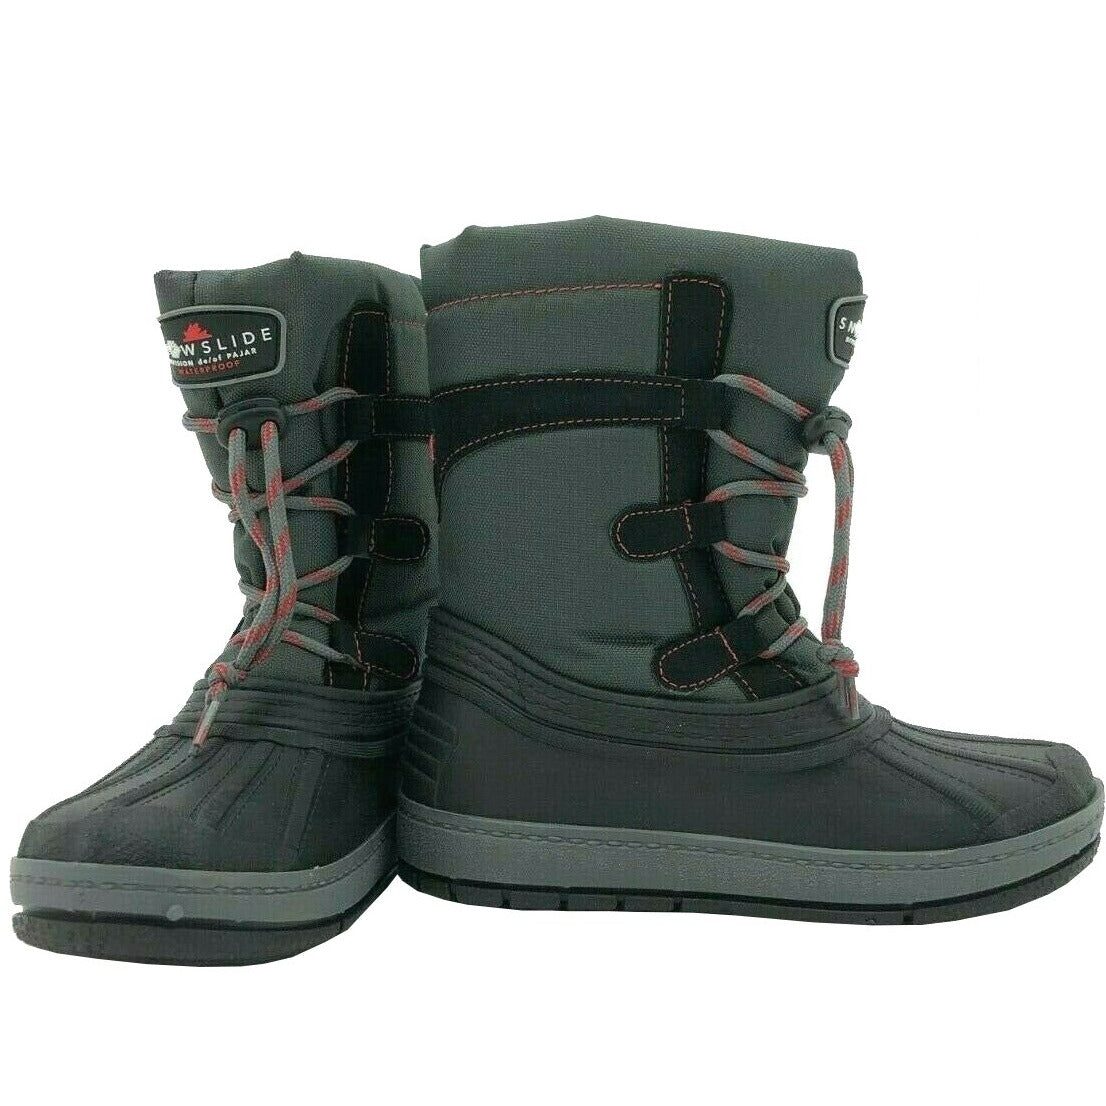 Kids witer boots